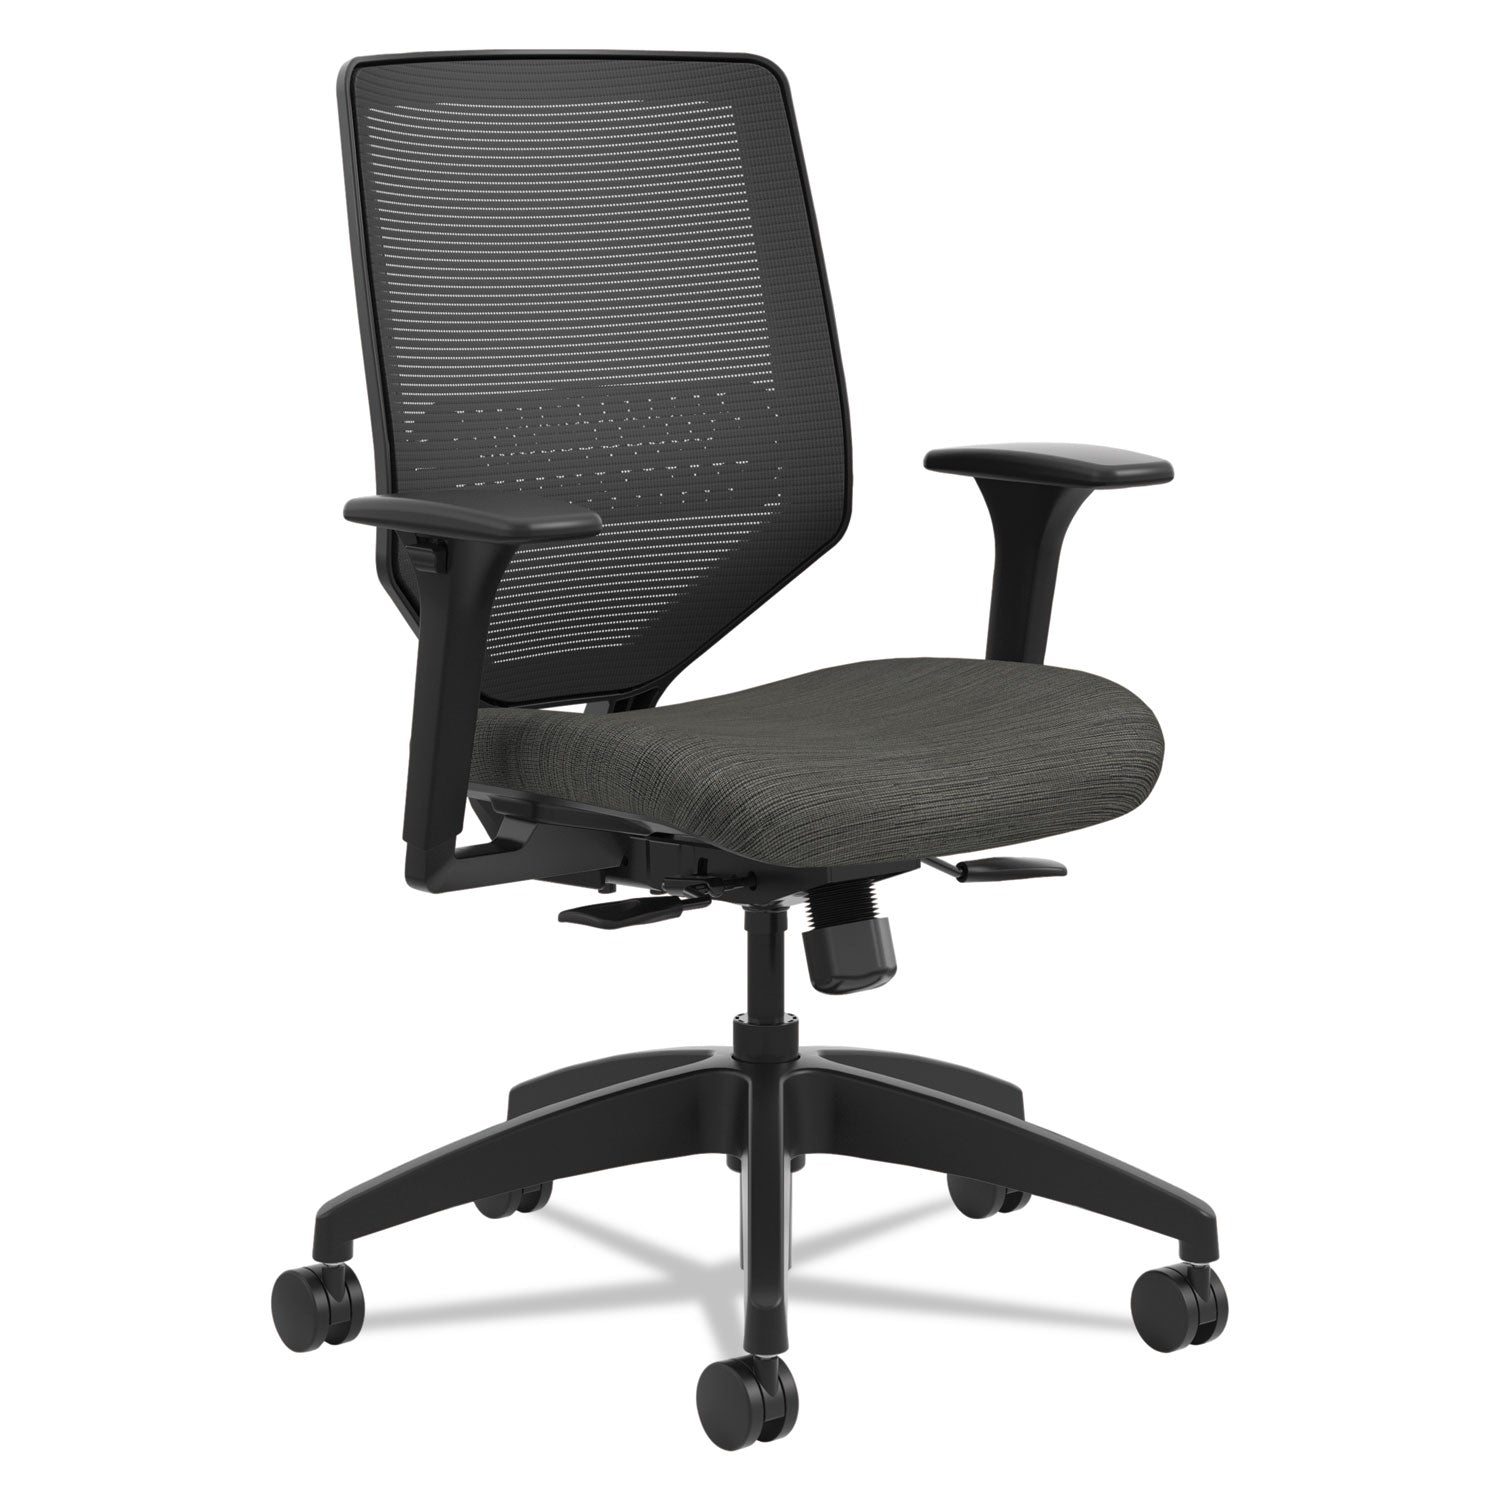 solve-series-mesh-back-task-chair-supports-up-to-300-lb-16-to-22-seat-height-ink-seat-black-back-base_honsvm1alc10tk - 1